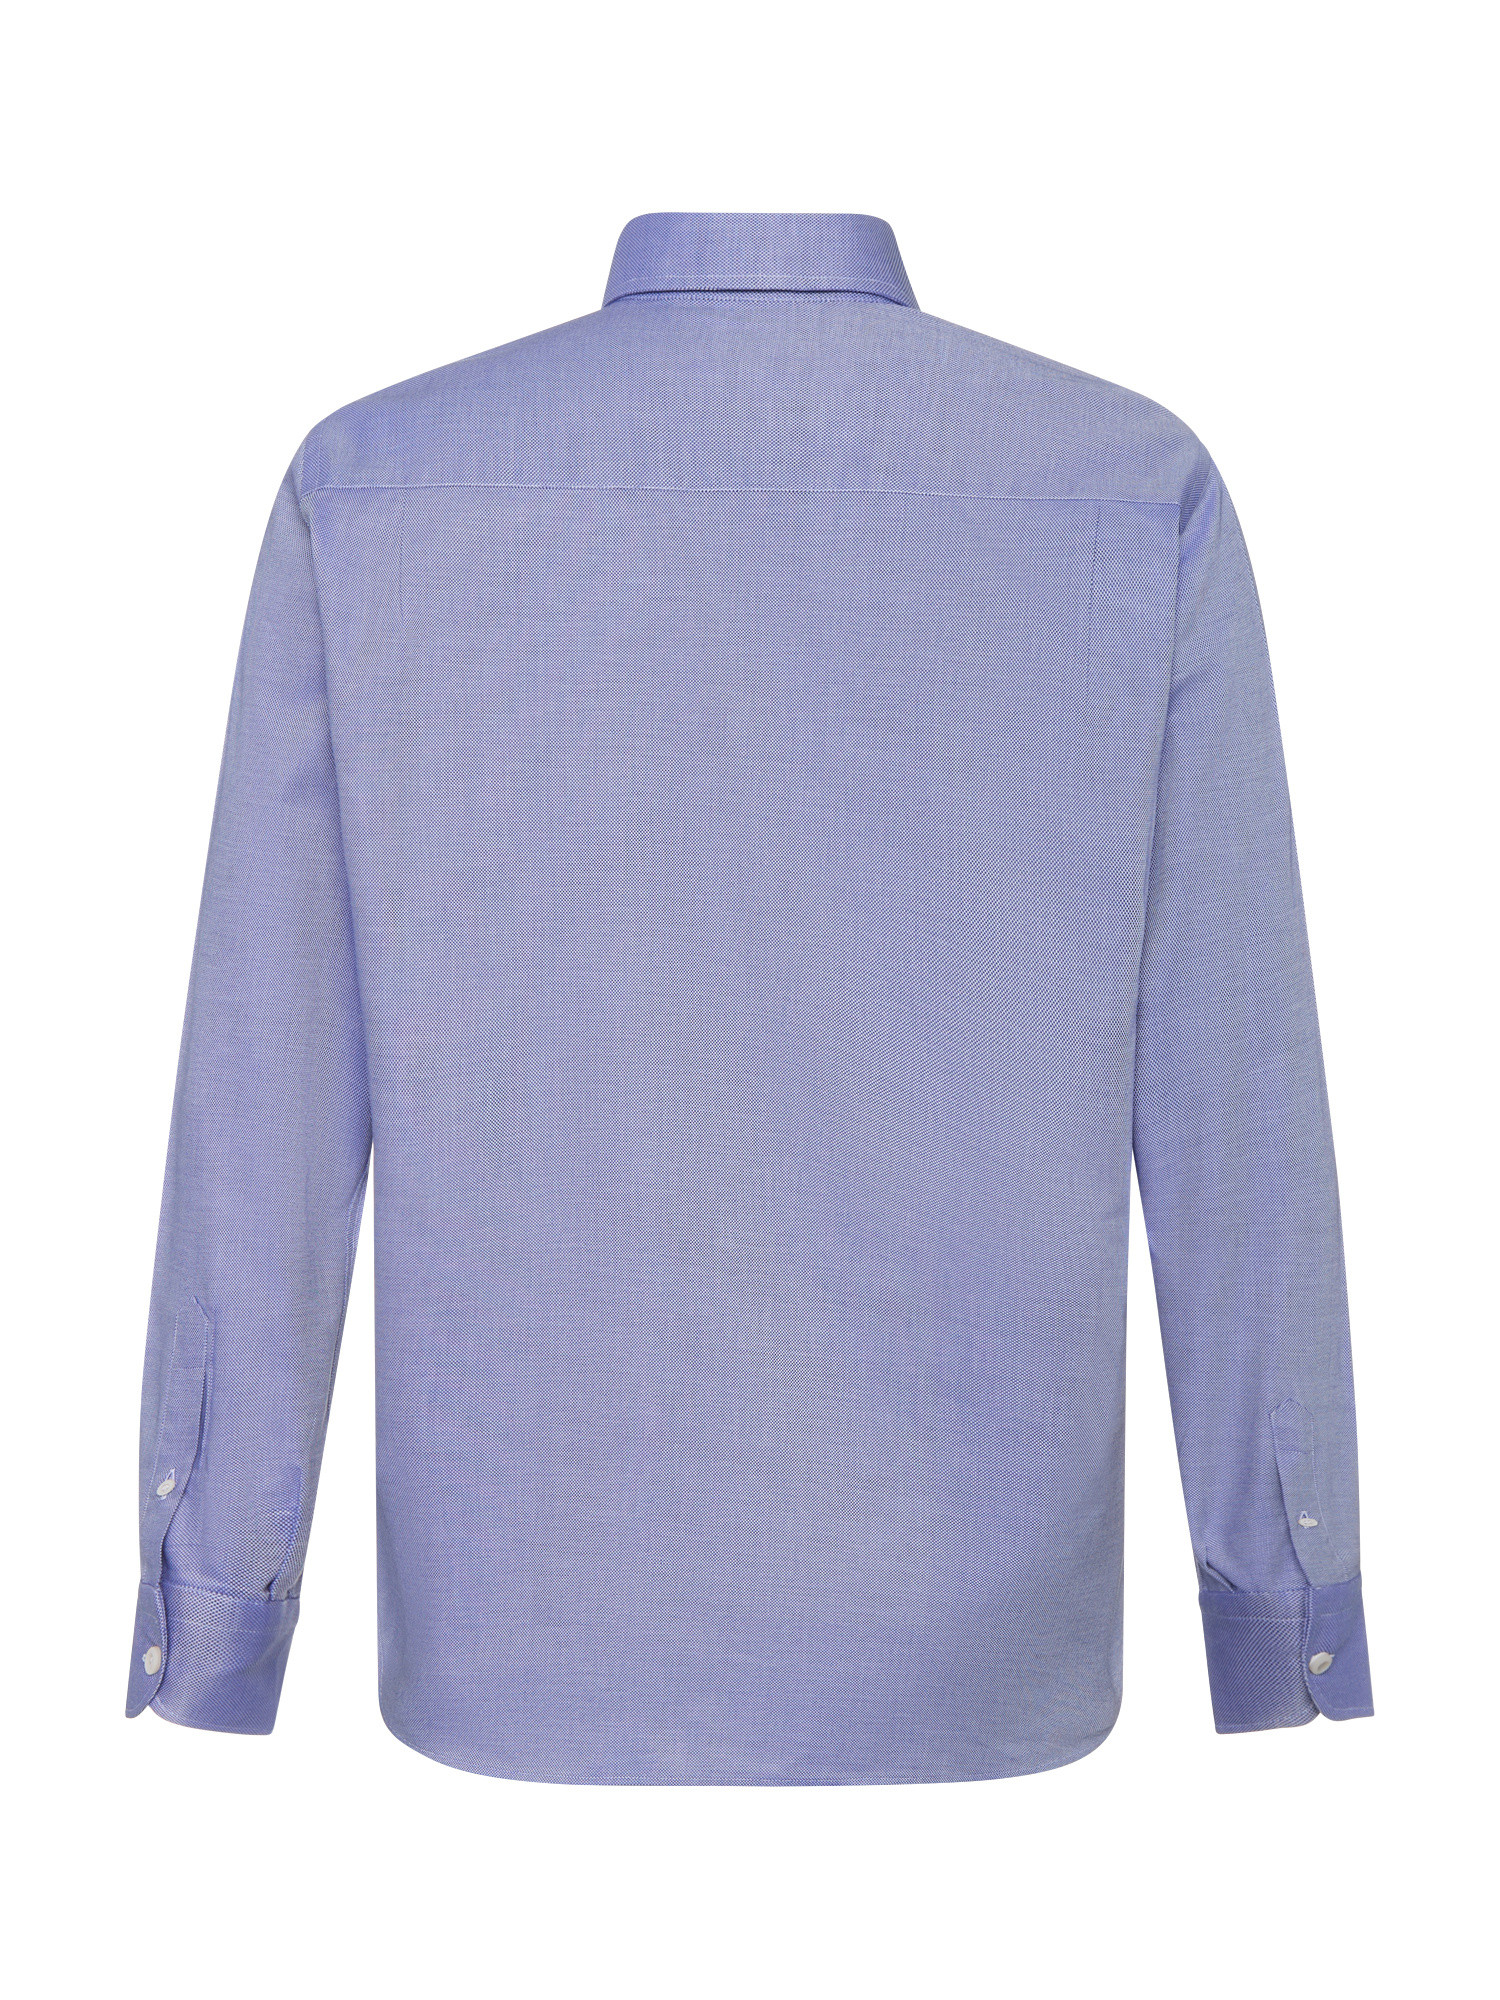 Luca D'Altieri - Regular fit chasuble shirt in pure textured cotton, Light Blue, large image number 2